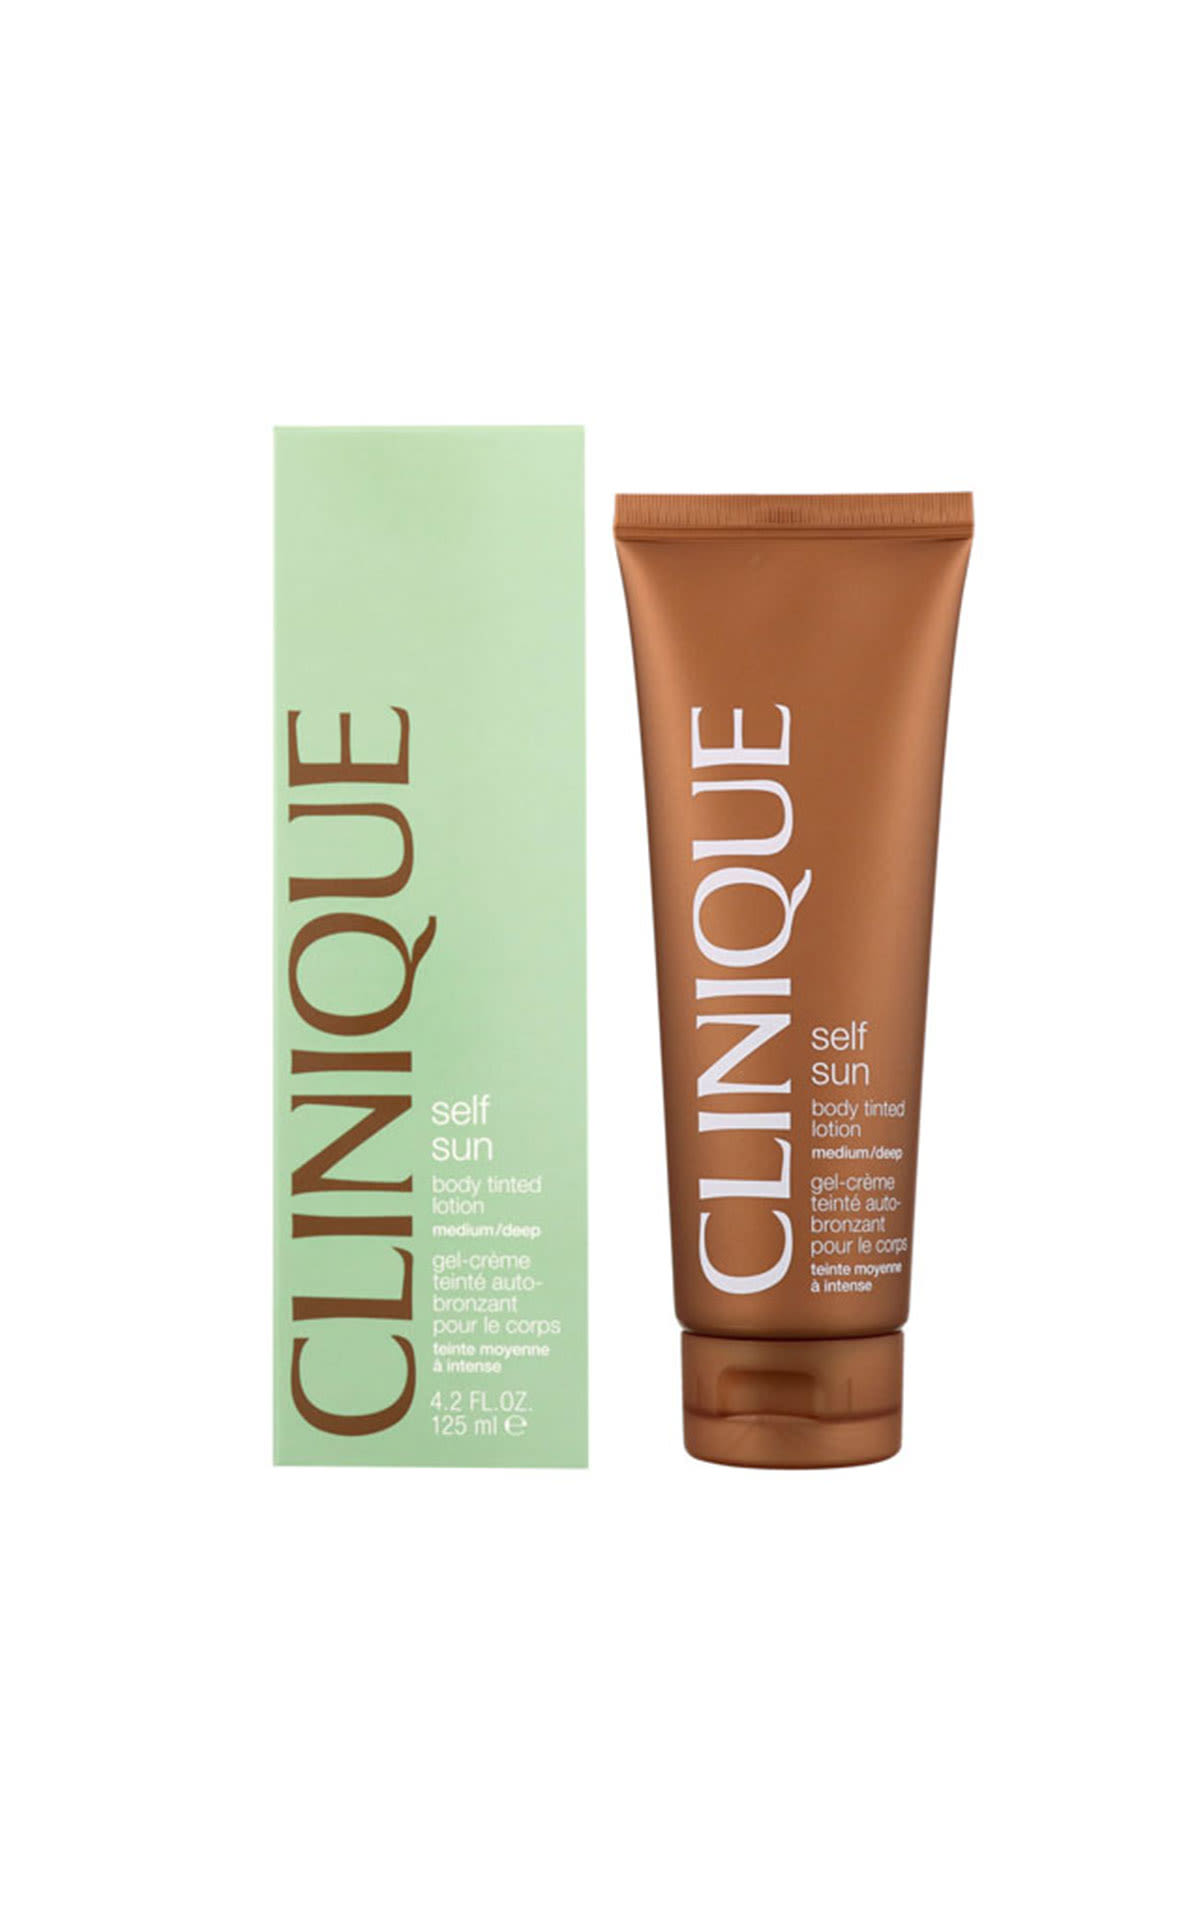 The Cosmetics Company Store Clinique Self sun body tinted lotion medium deep 125ml from Bicester Village